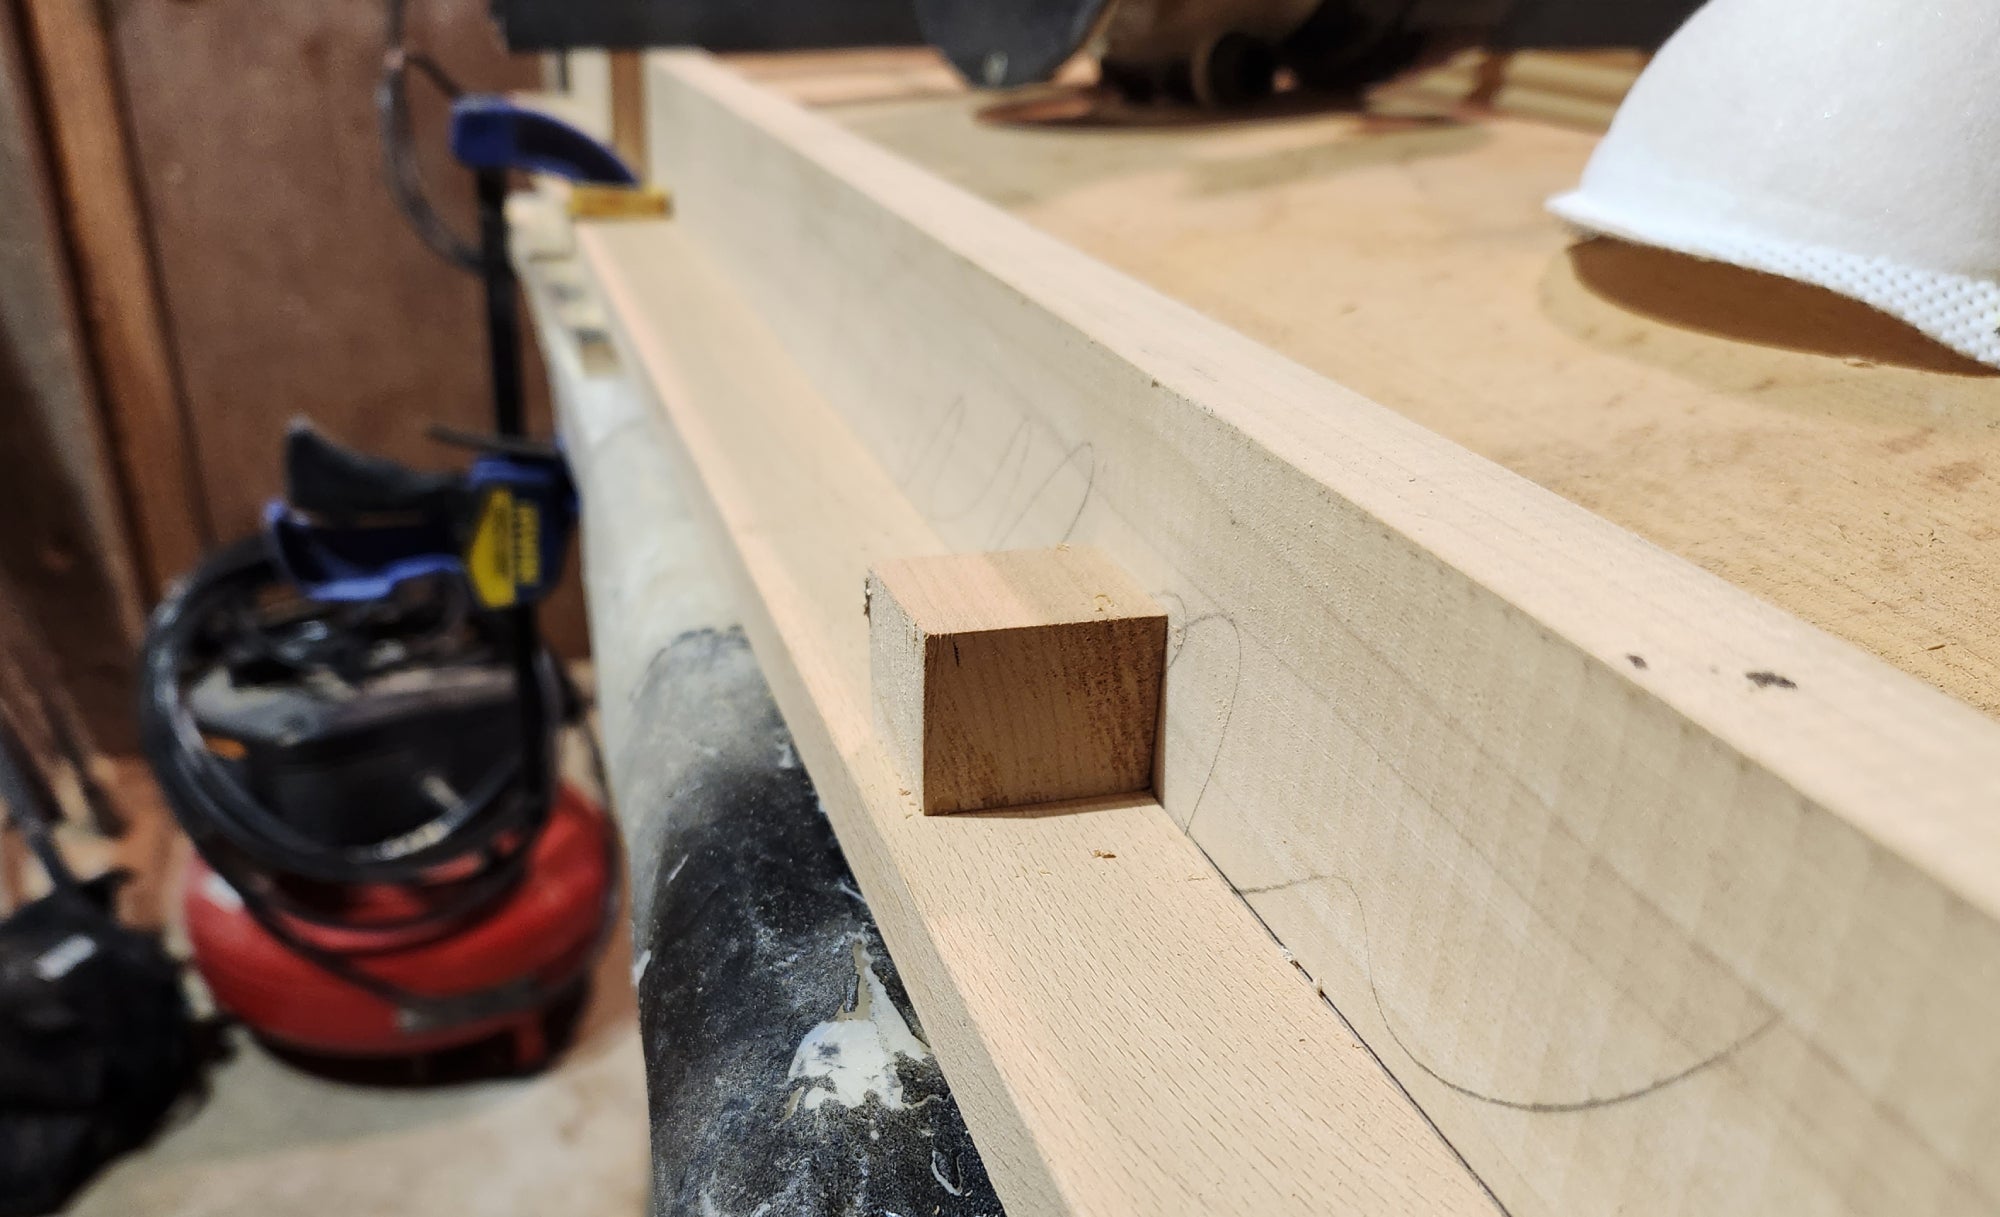 A small wooden square used to brace the rail of a homemade router sled.